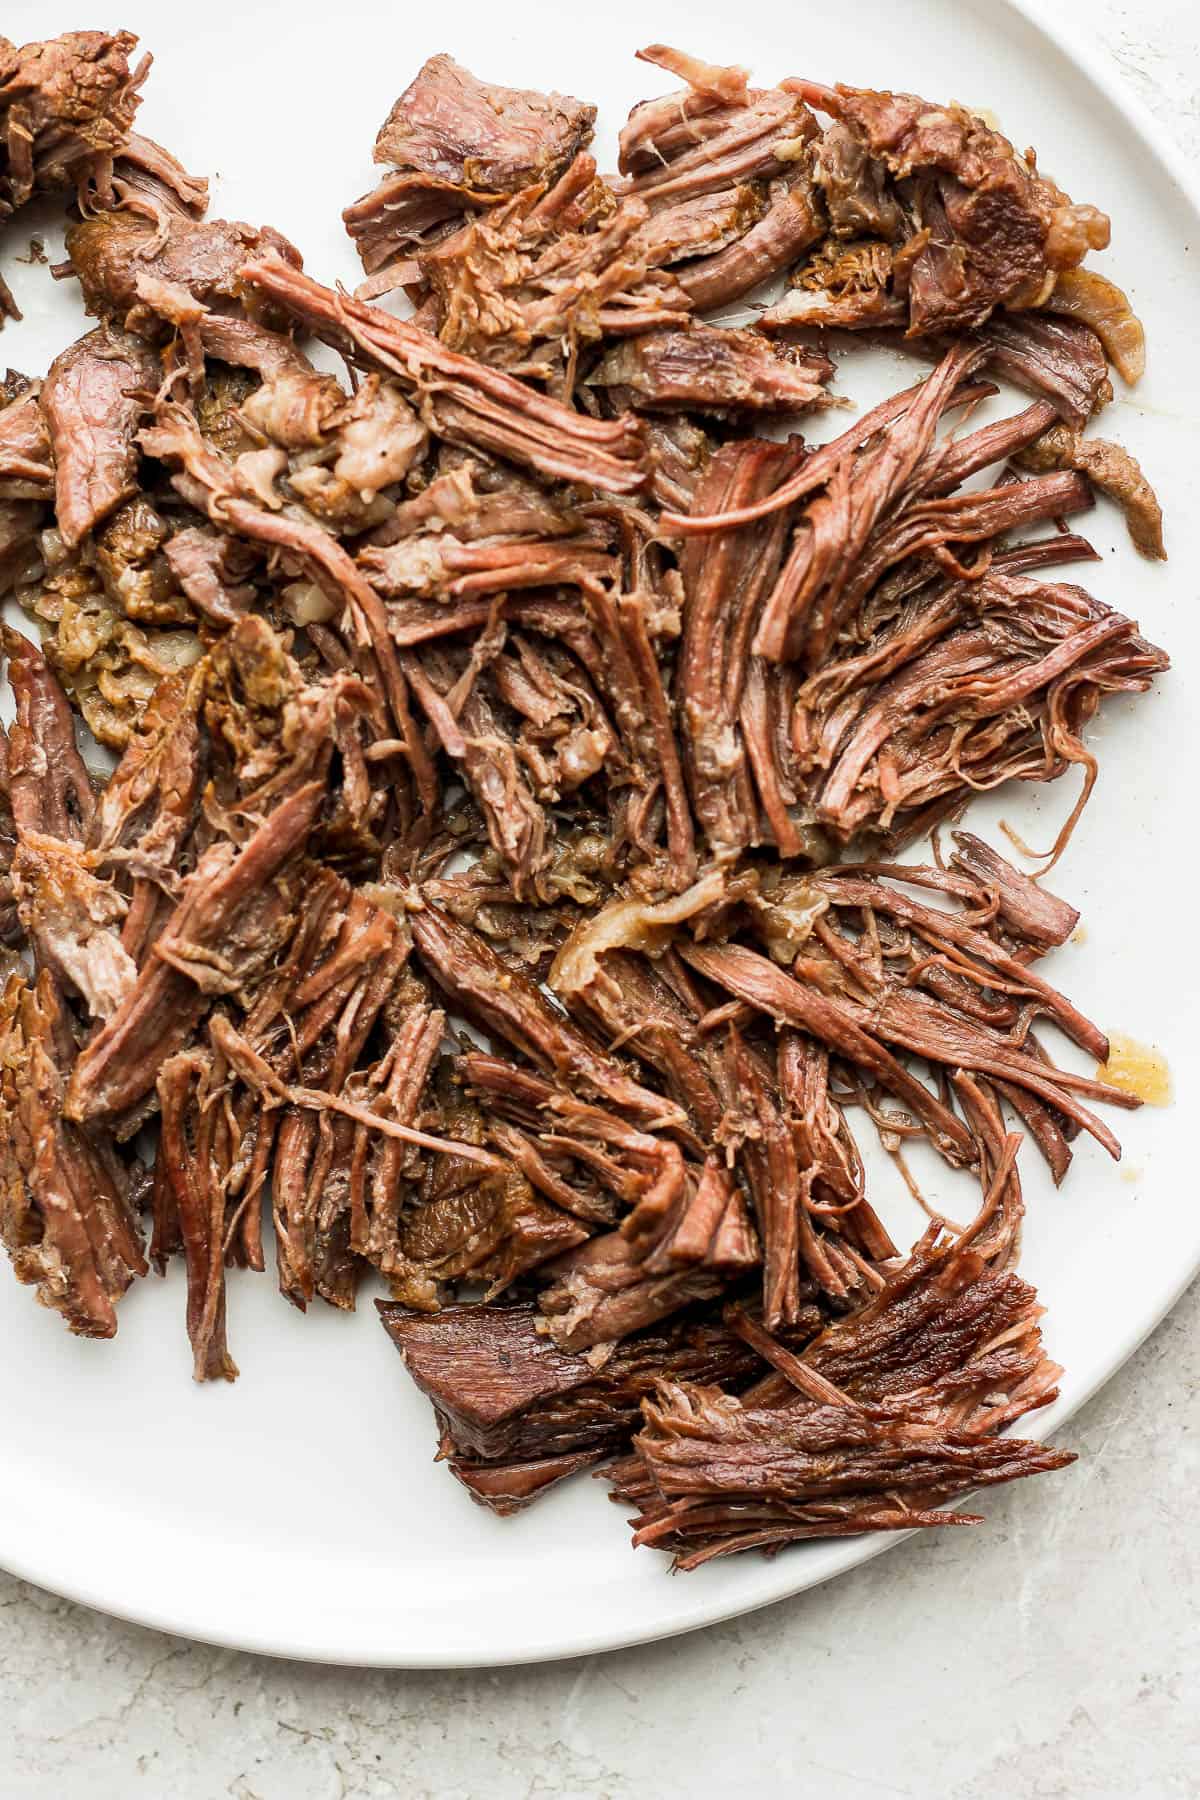 The beef removed from the slow cooker and shredded on a plate.